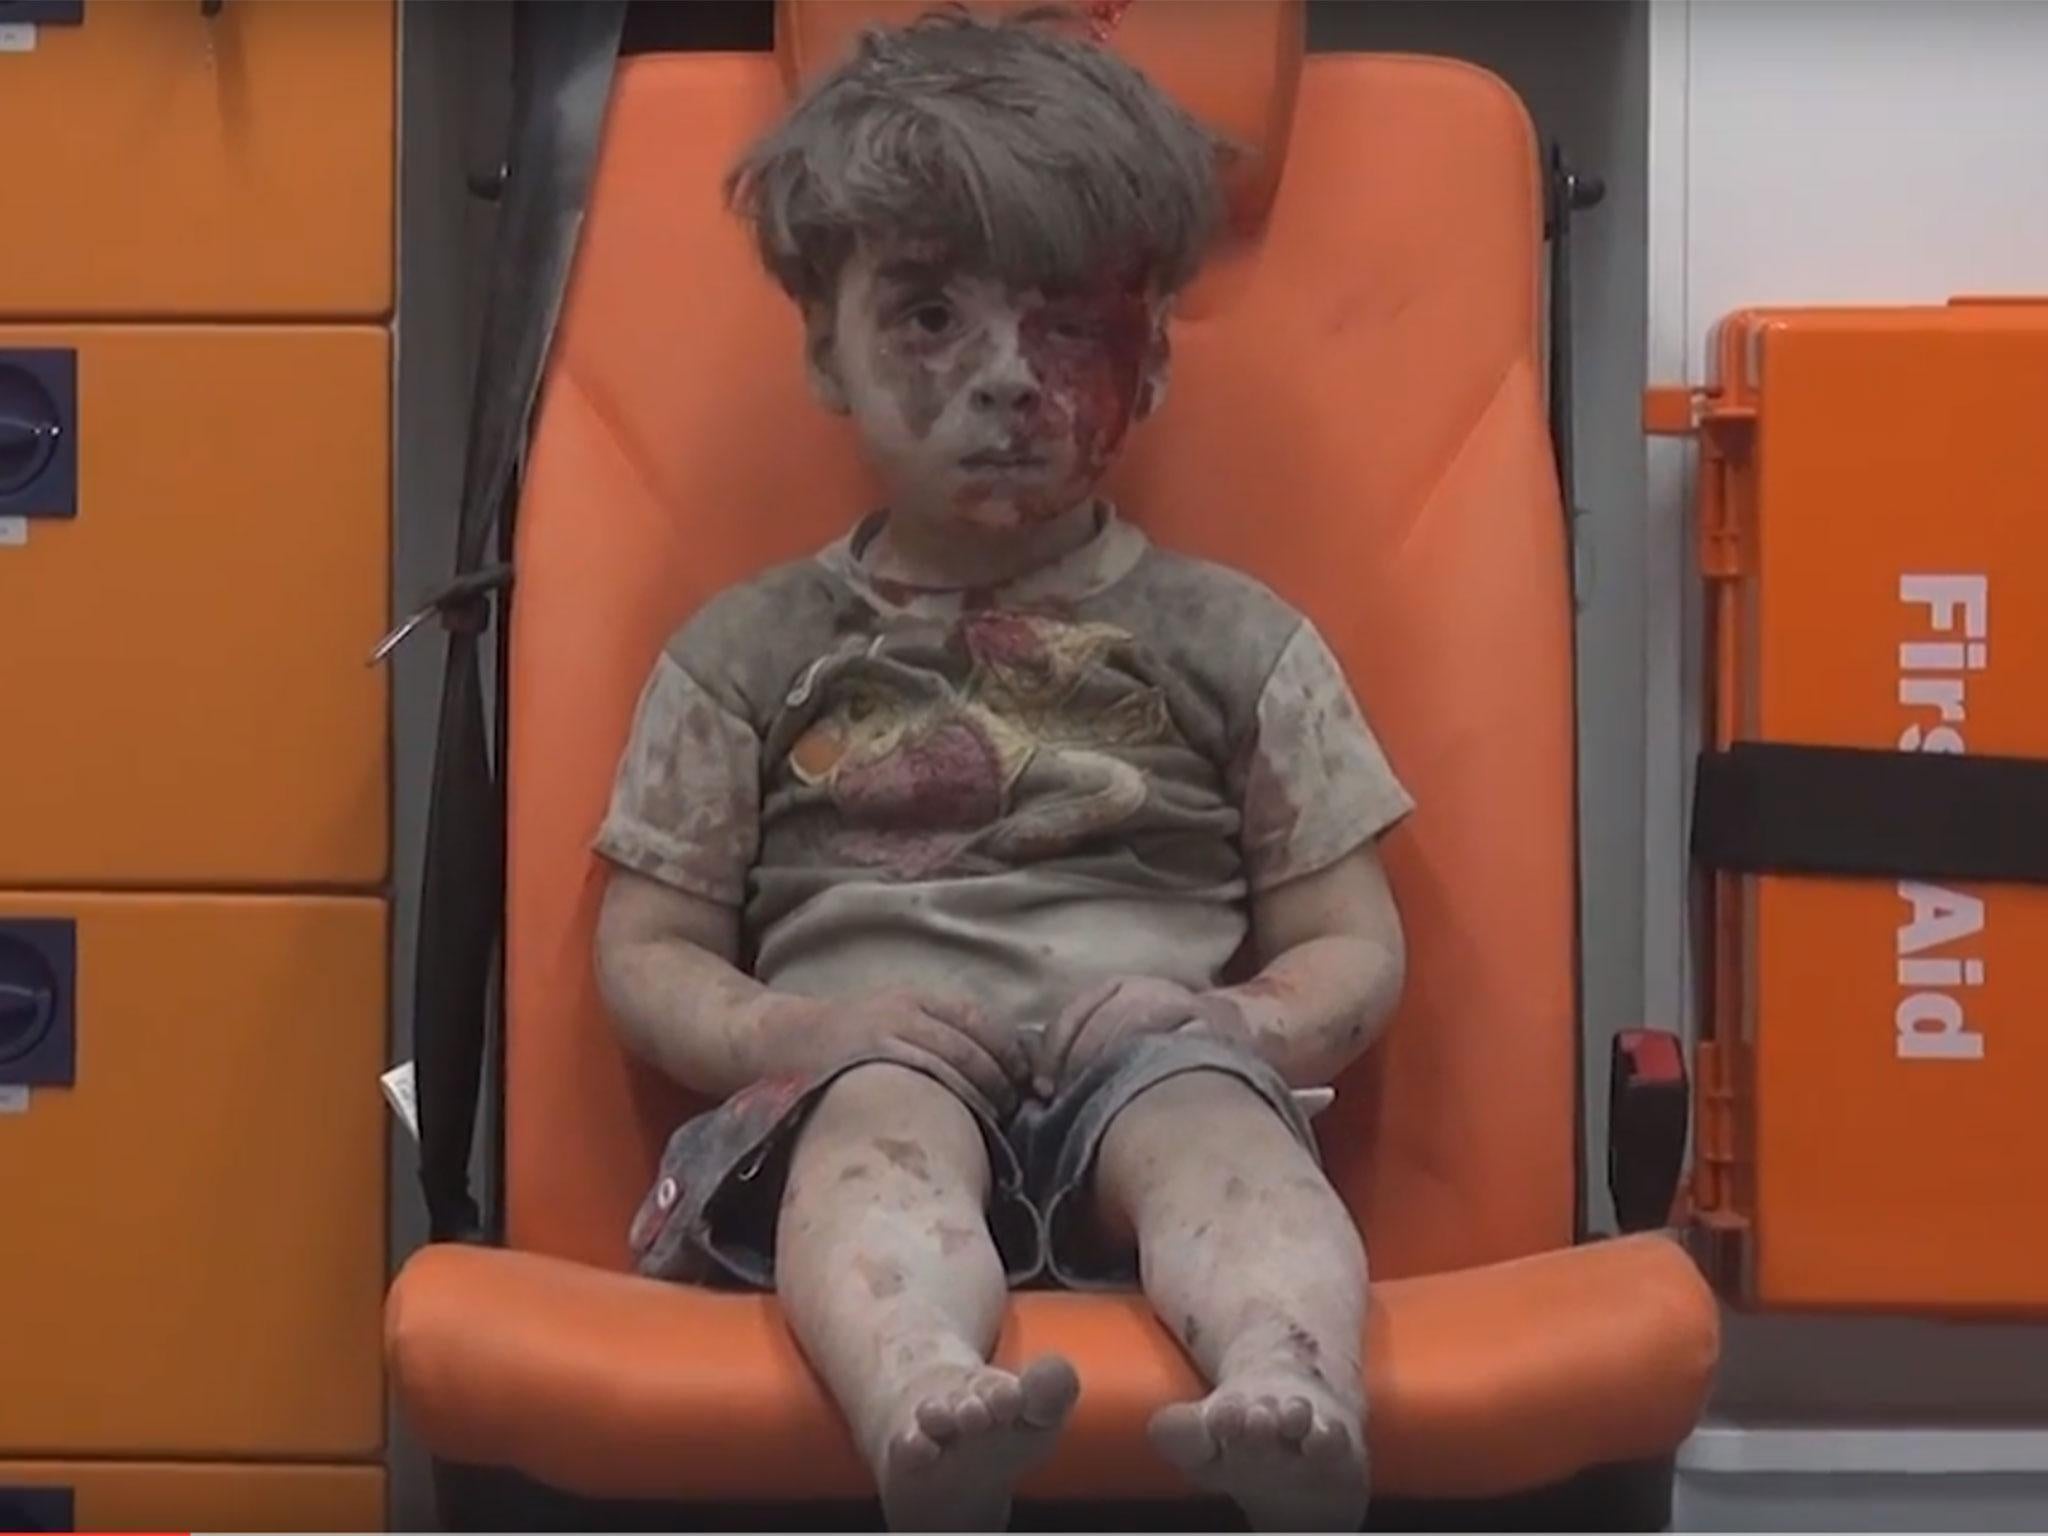 This image of the five-year-old Syrian boy shocked the world